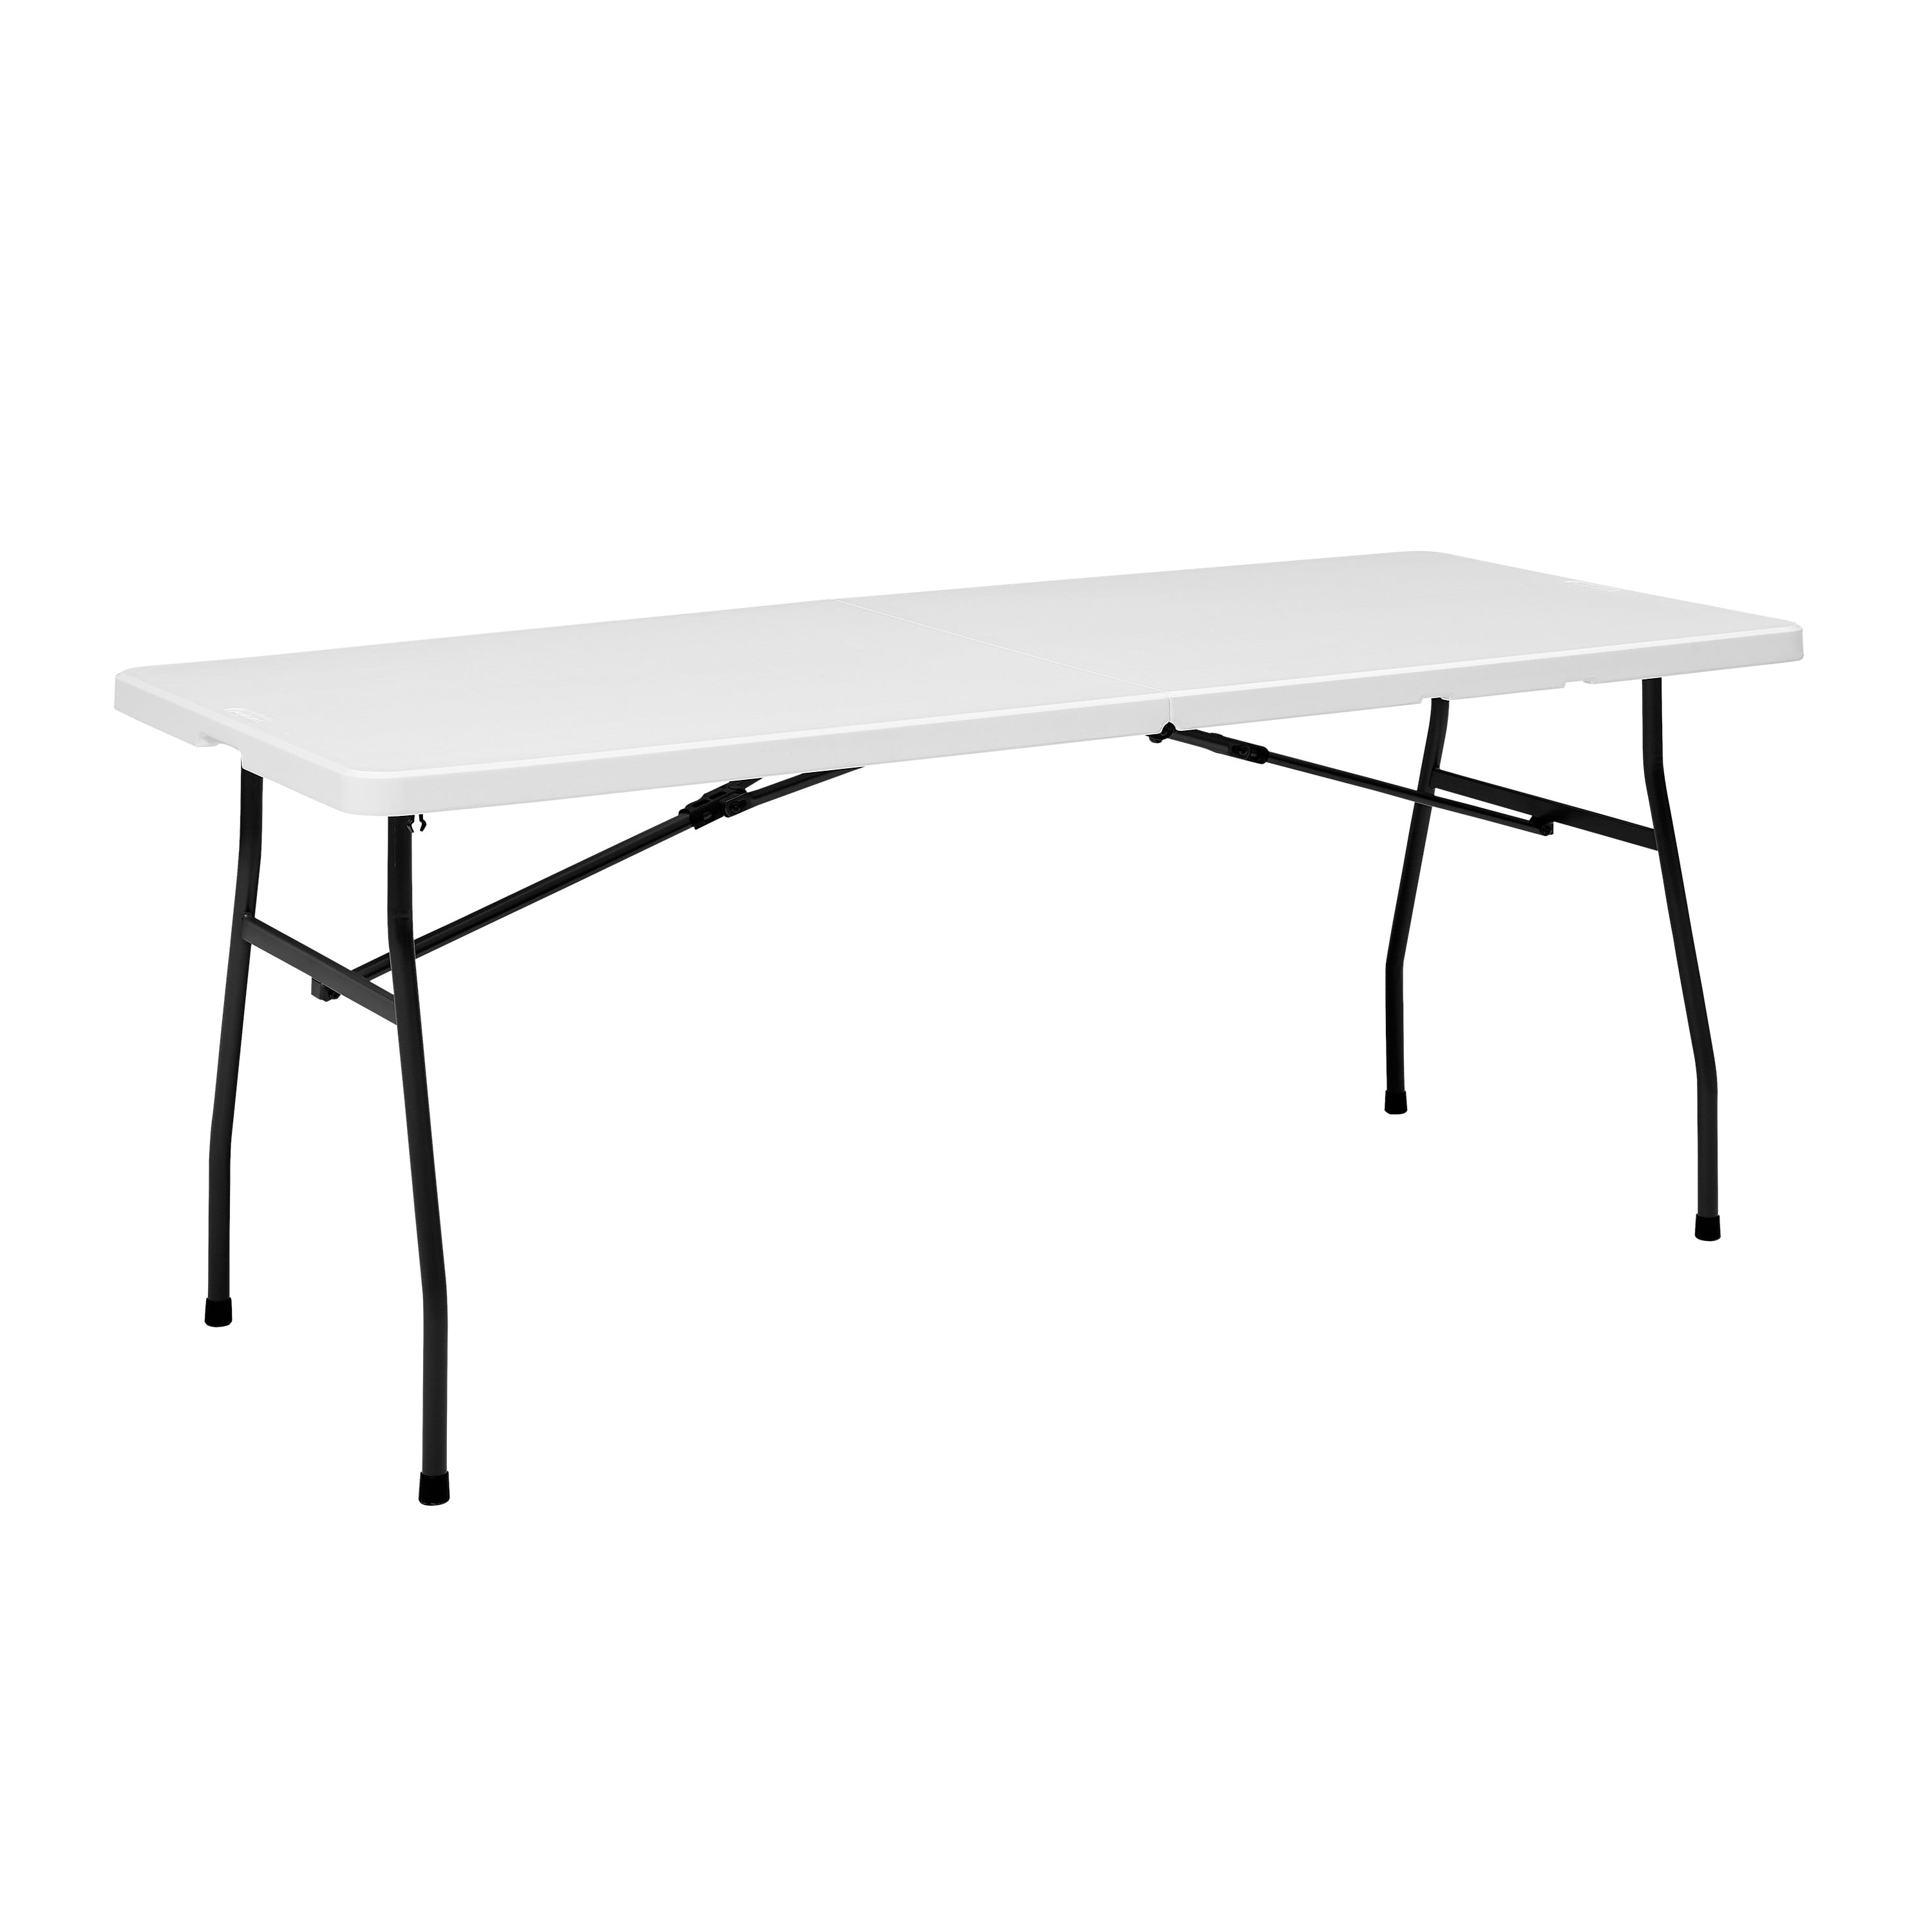 Mainstays Indoor Folding Table Set of 4 in Black L19 x W15 x H26 inches. 4  Tables+1 Rack Stand.